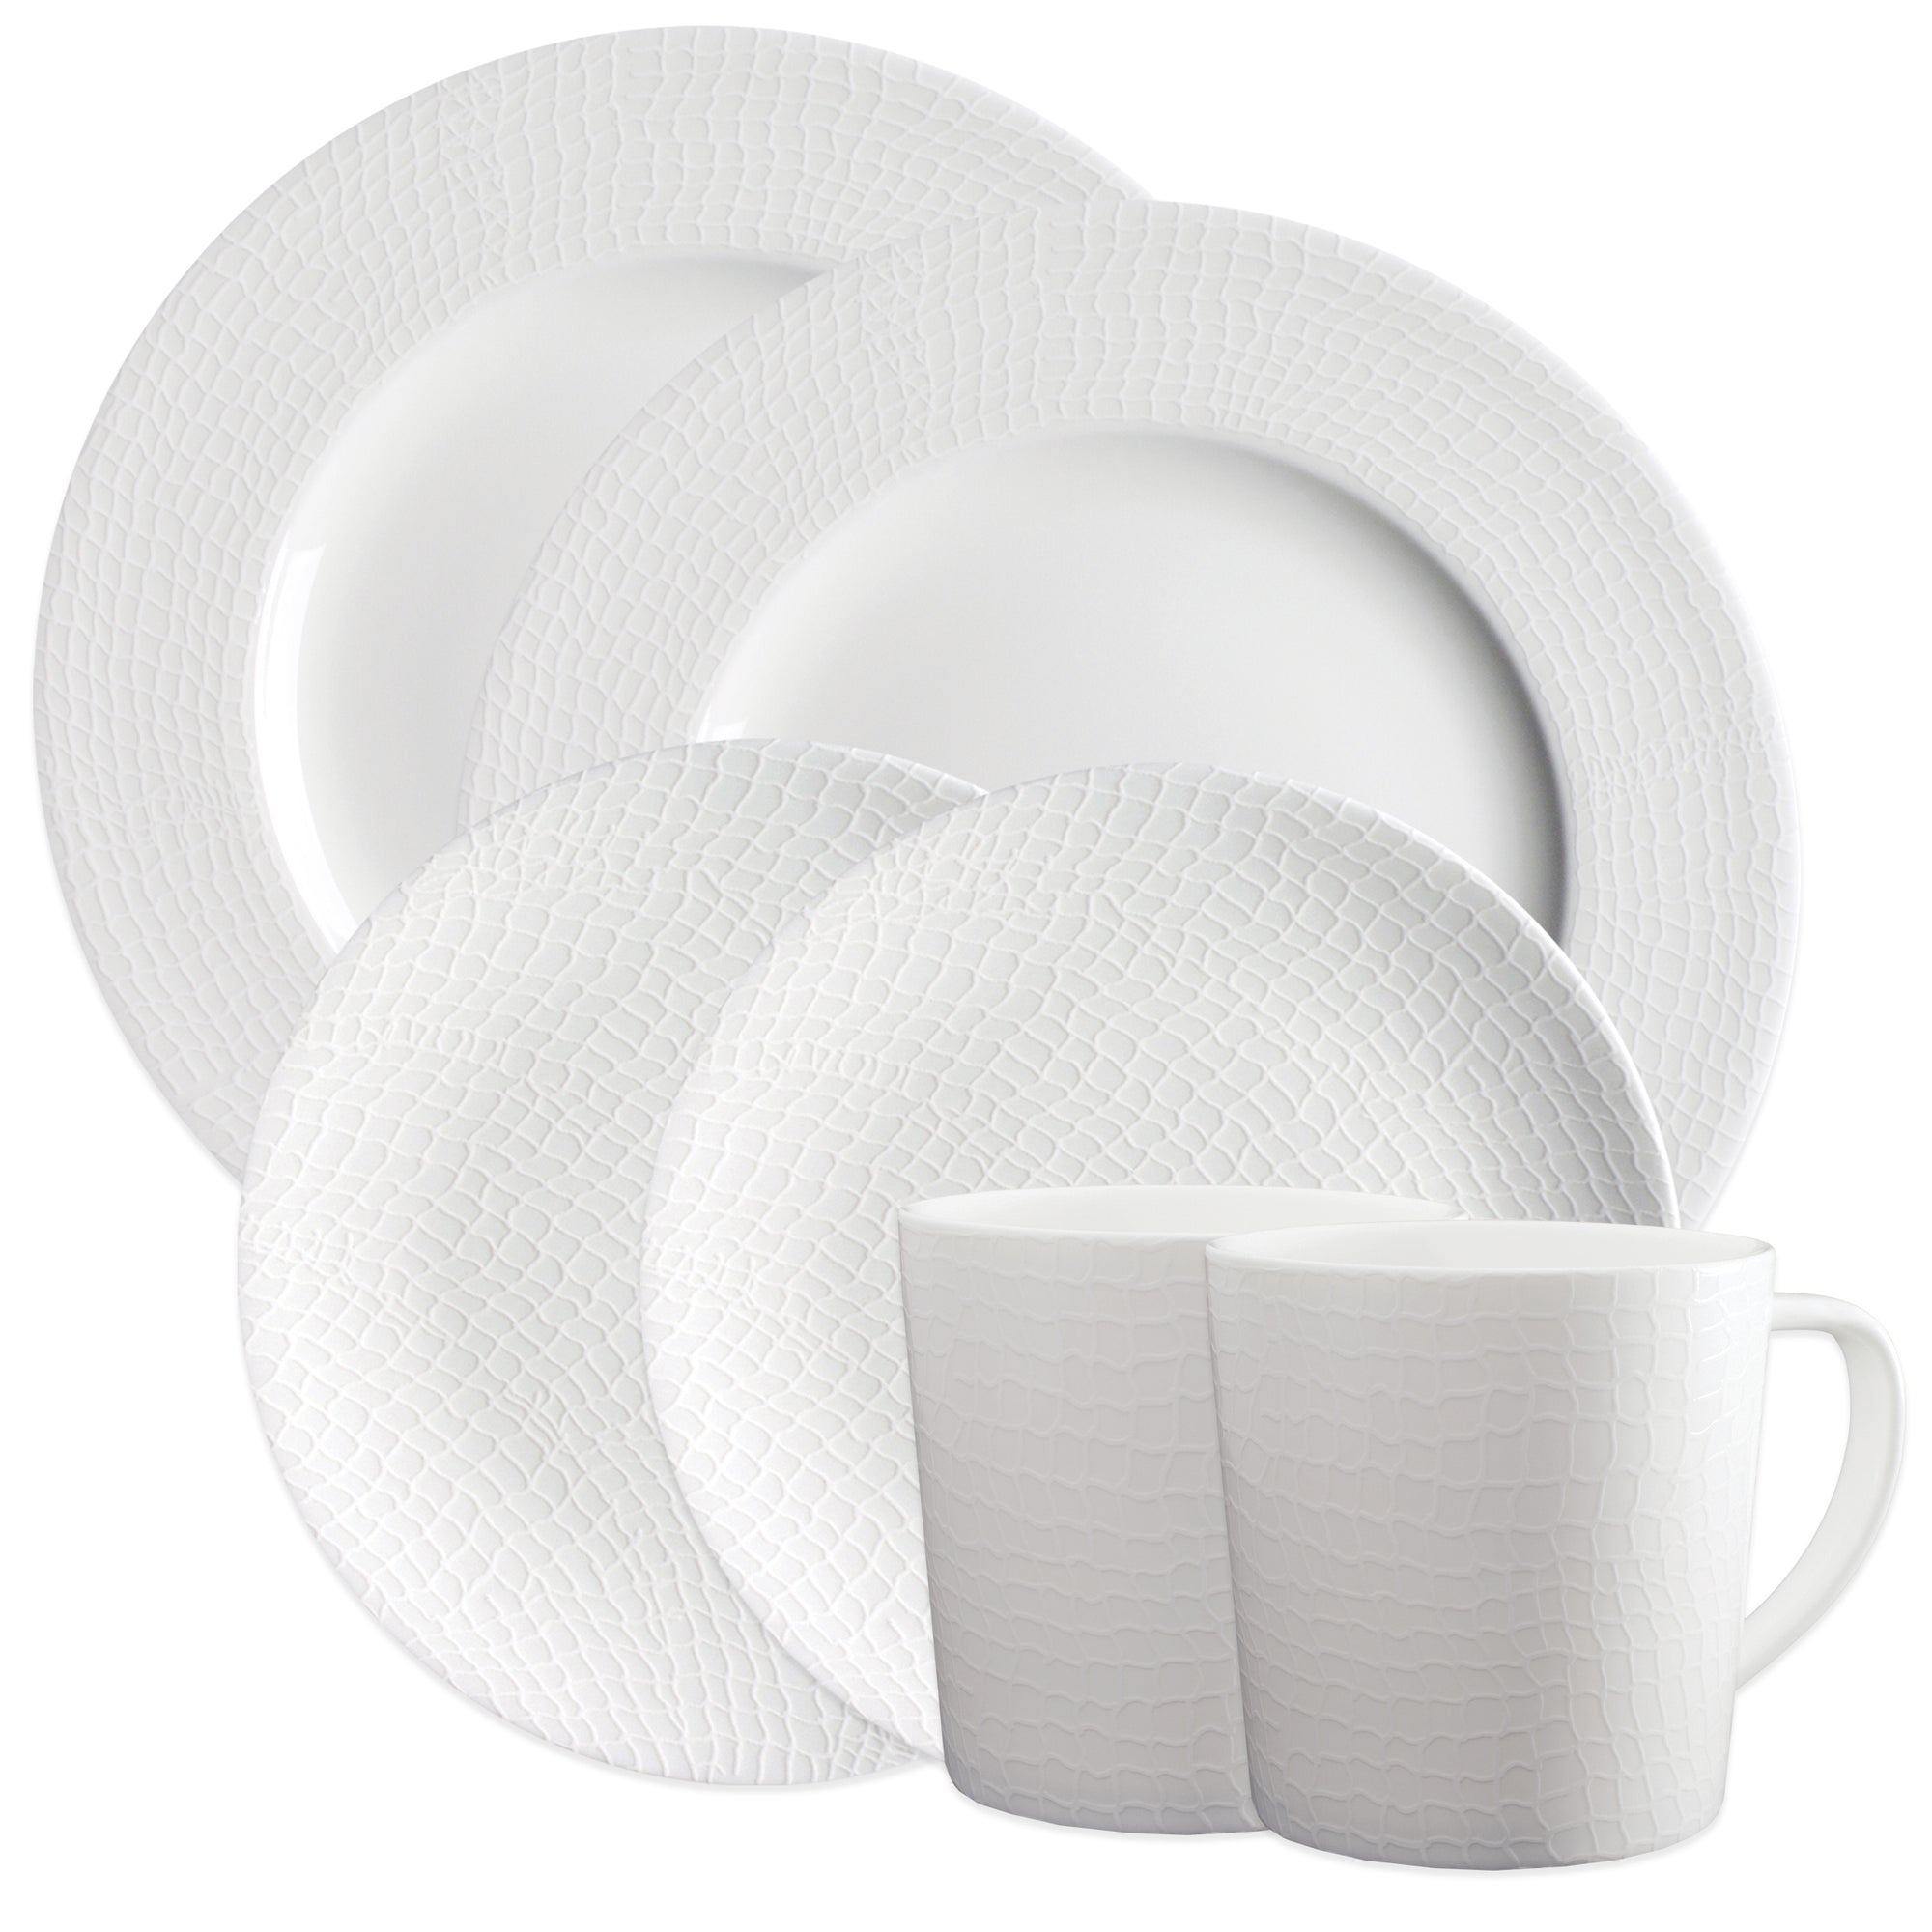 Catch Textured White Porcelain Dinnerware set for 2 with 2 Dinner Plates, 2 Salad Plates, and 2 Mugs from Caskata